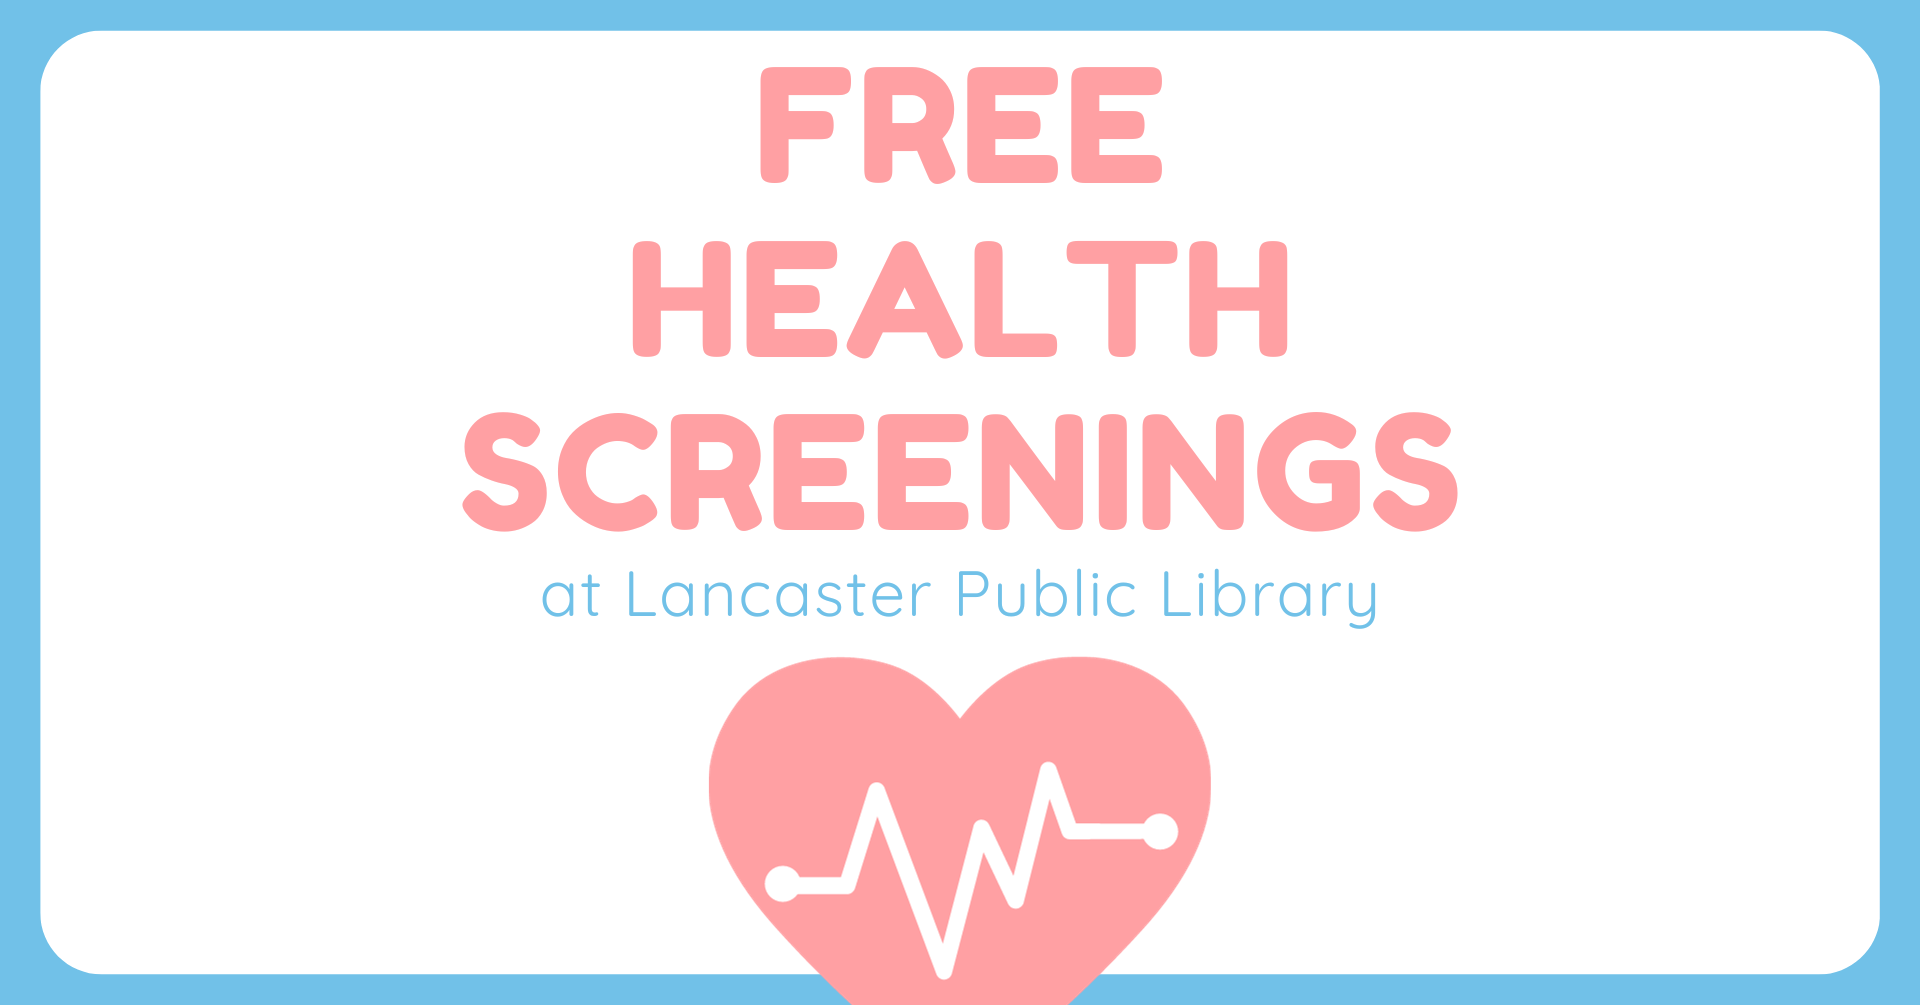 Free Health Screenings on beige background with pink heart at bottom of graphic